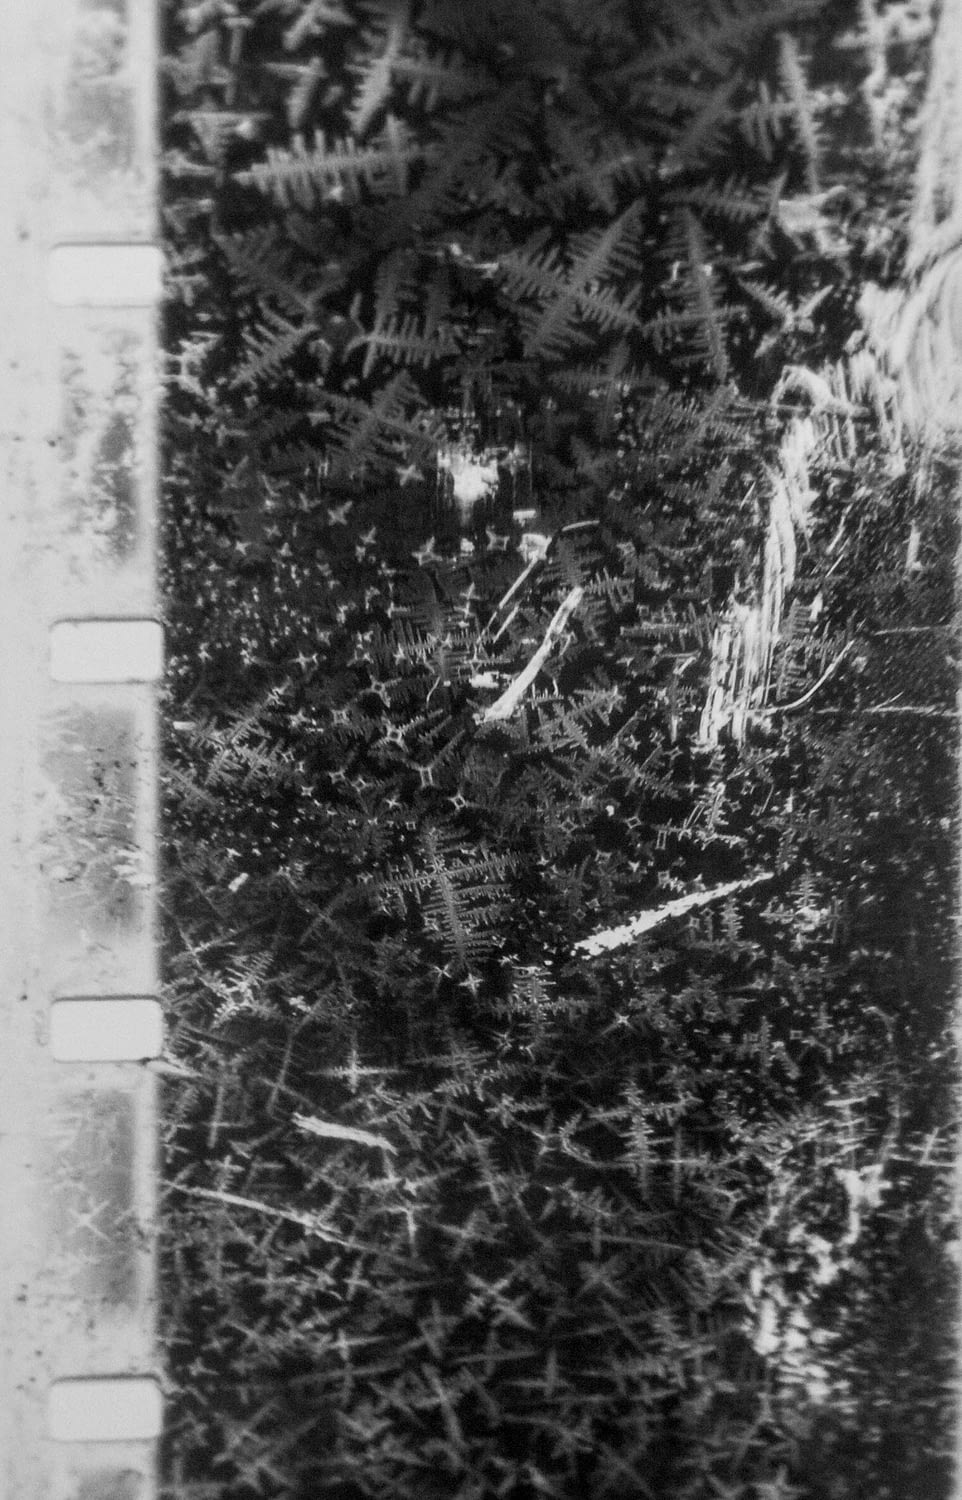 Image 1: Assimilate and Destroy I, still from 16mm film exposed to salt, 2018.